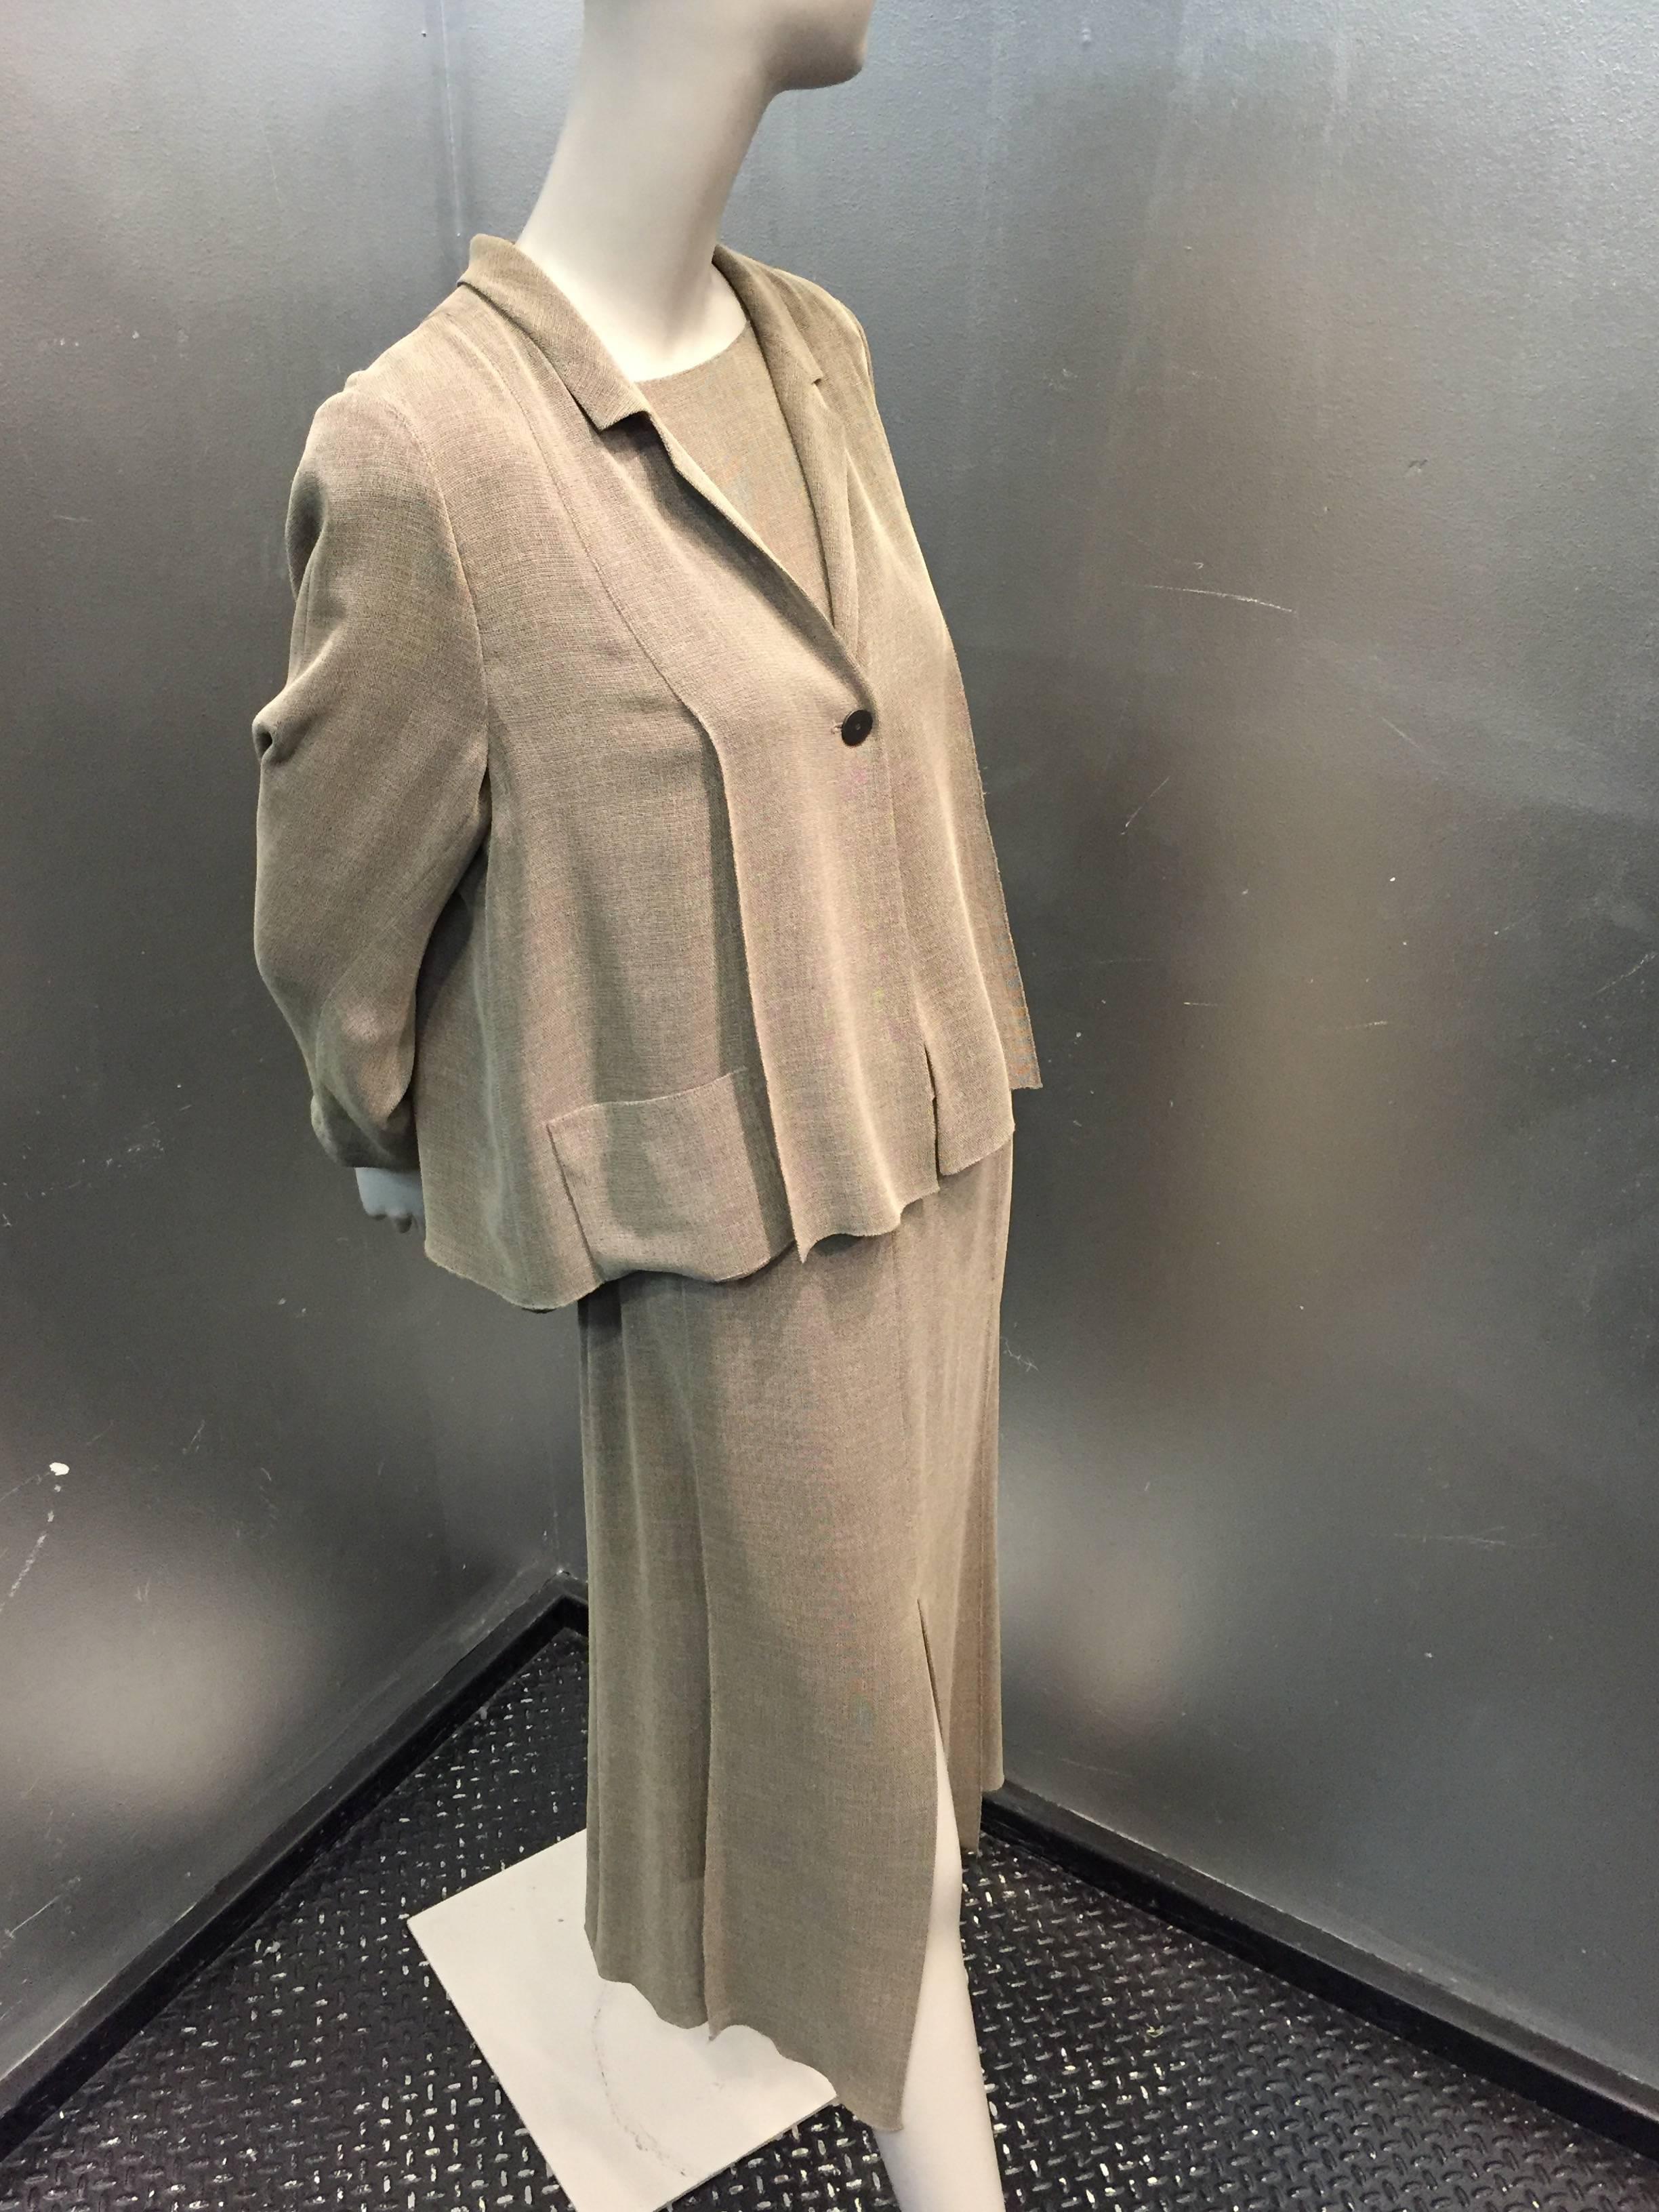 1990s Chanel loden-green summer 3-piece skirt suit:  A lightweight open-weave rayon crepe set.  3-Button back shell, back pleated swing-style jacket with front pockets, notched lapel, 